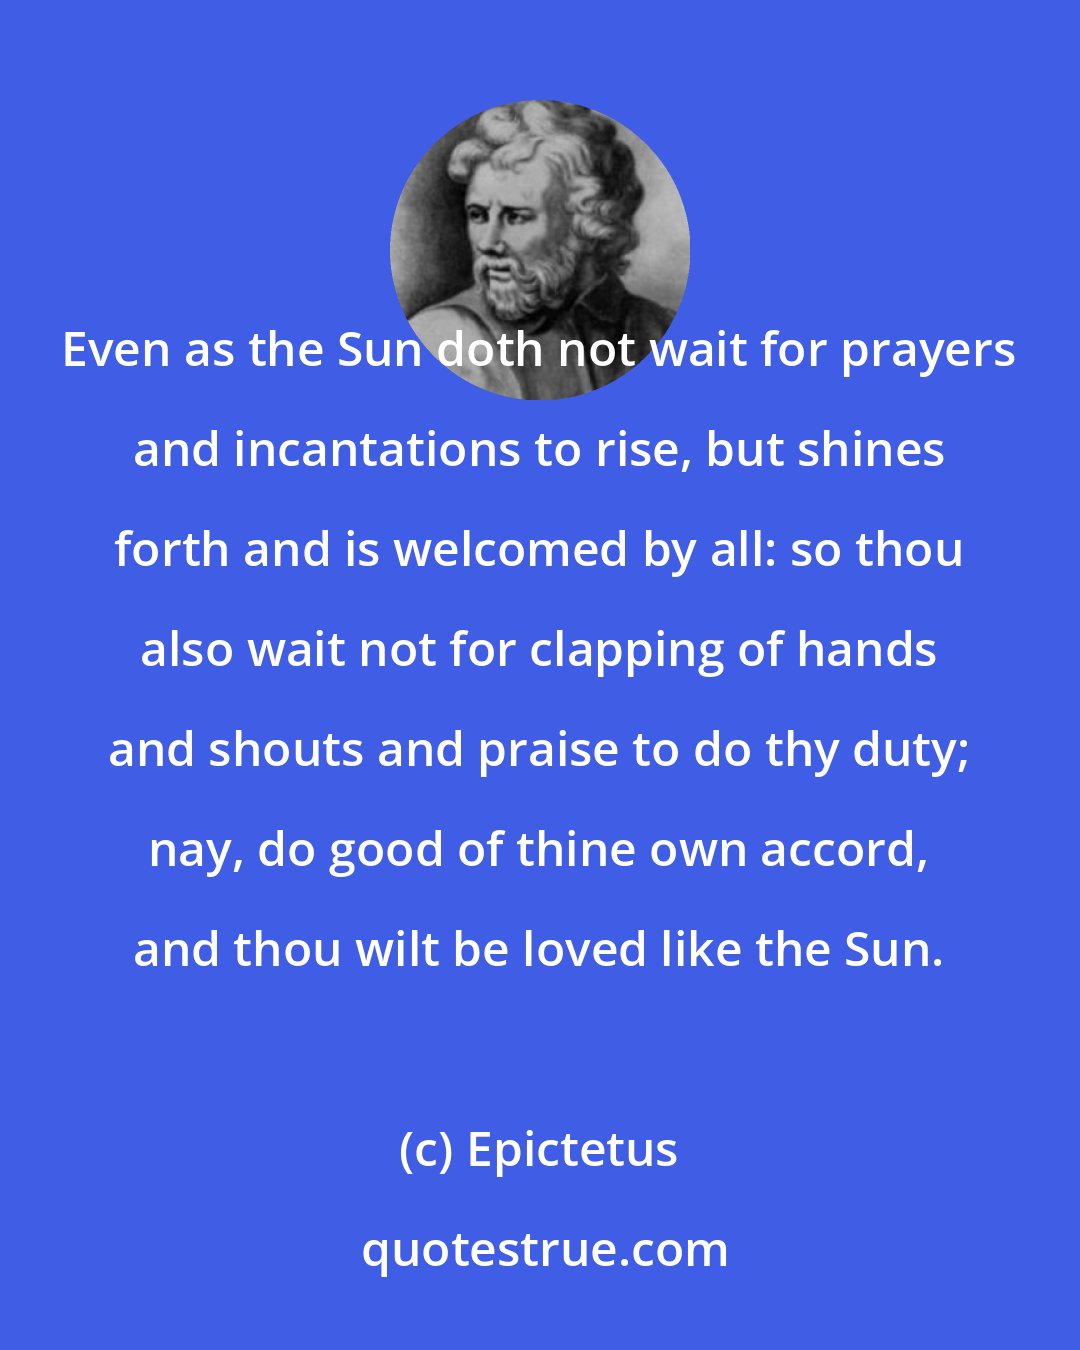 Epictetus: Even as the Sun doth not wait for prayers and incantations to rise, but shines forth and is welcomed by all: so thou also wait not for clapping of hands and shouts and praise to do thy duty; nay, do good of thine own accord, and thou wilt be loved like the Sun.